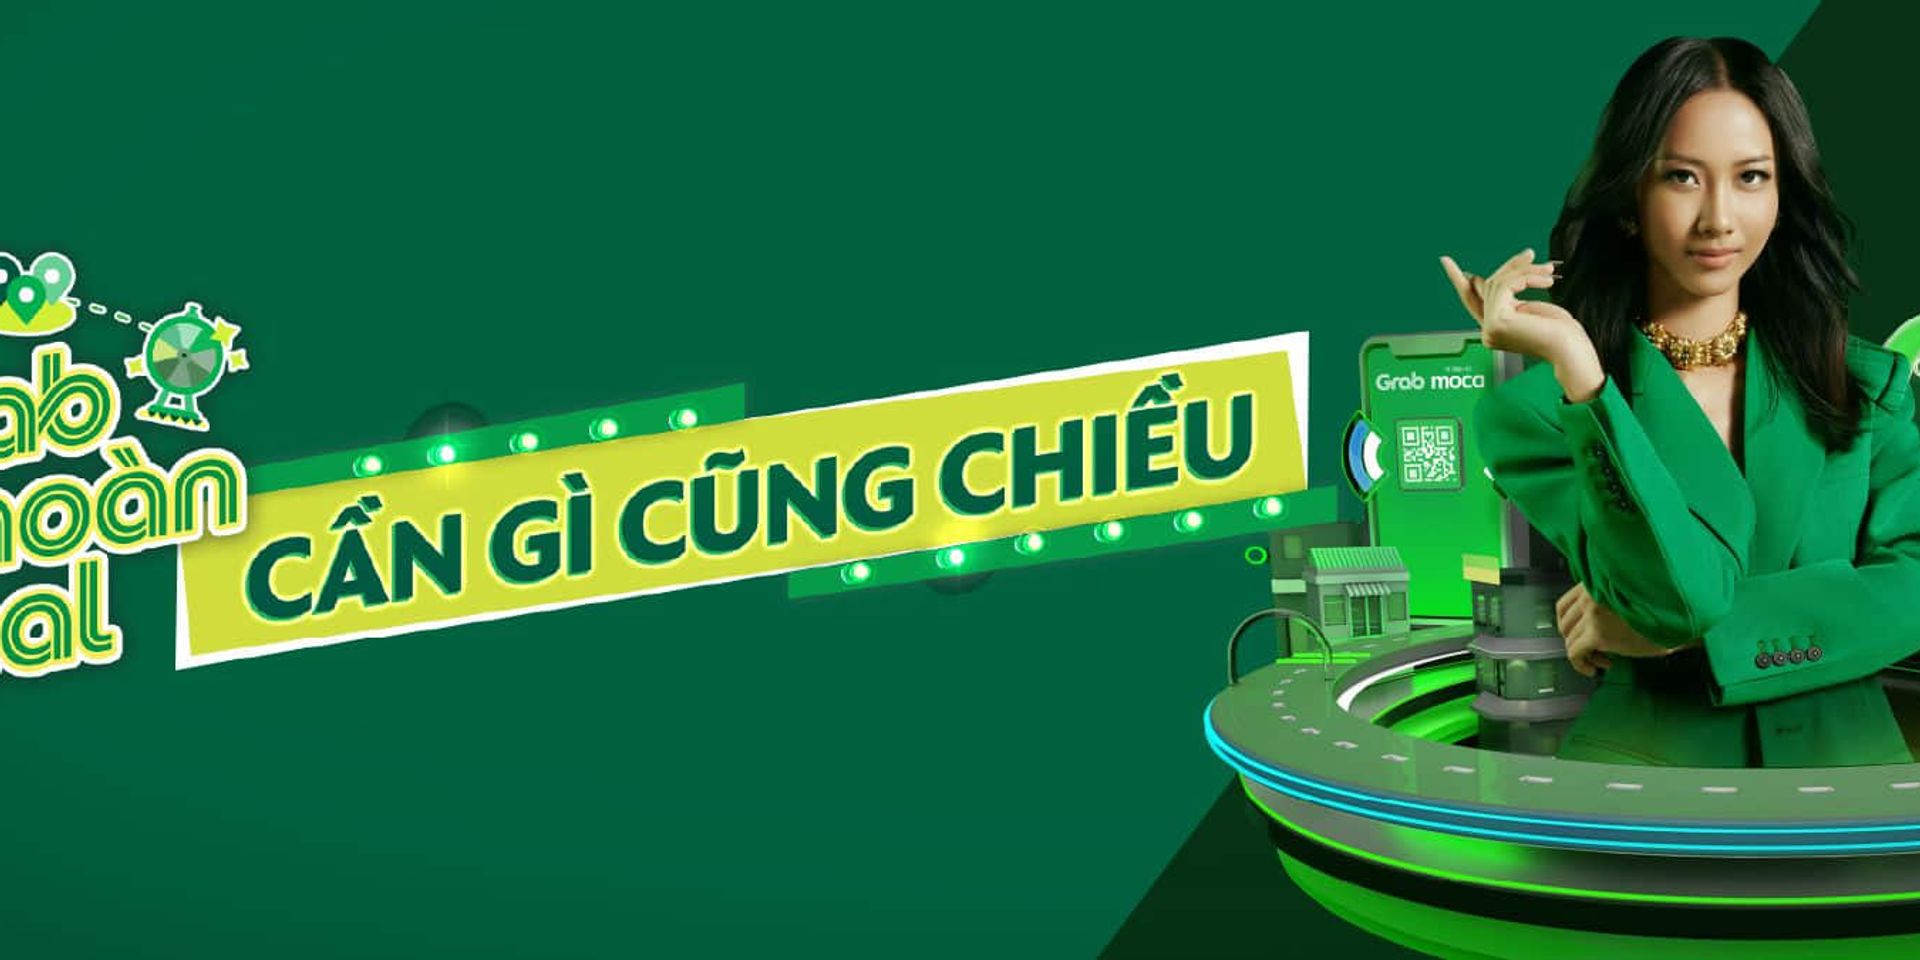 Image of Grab and Suboi in the advertising campaign